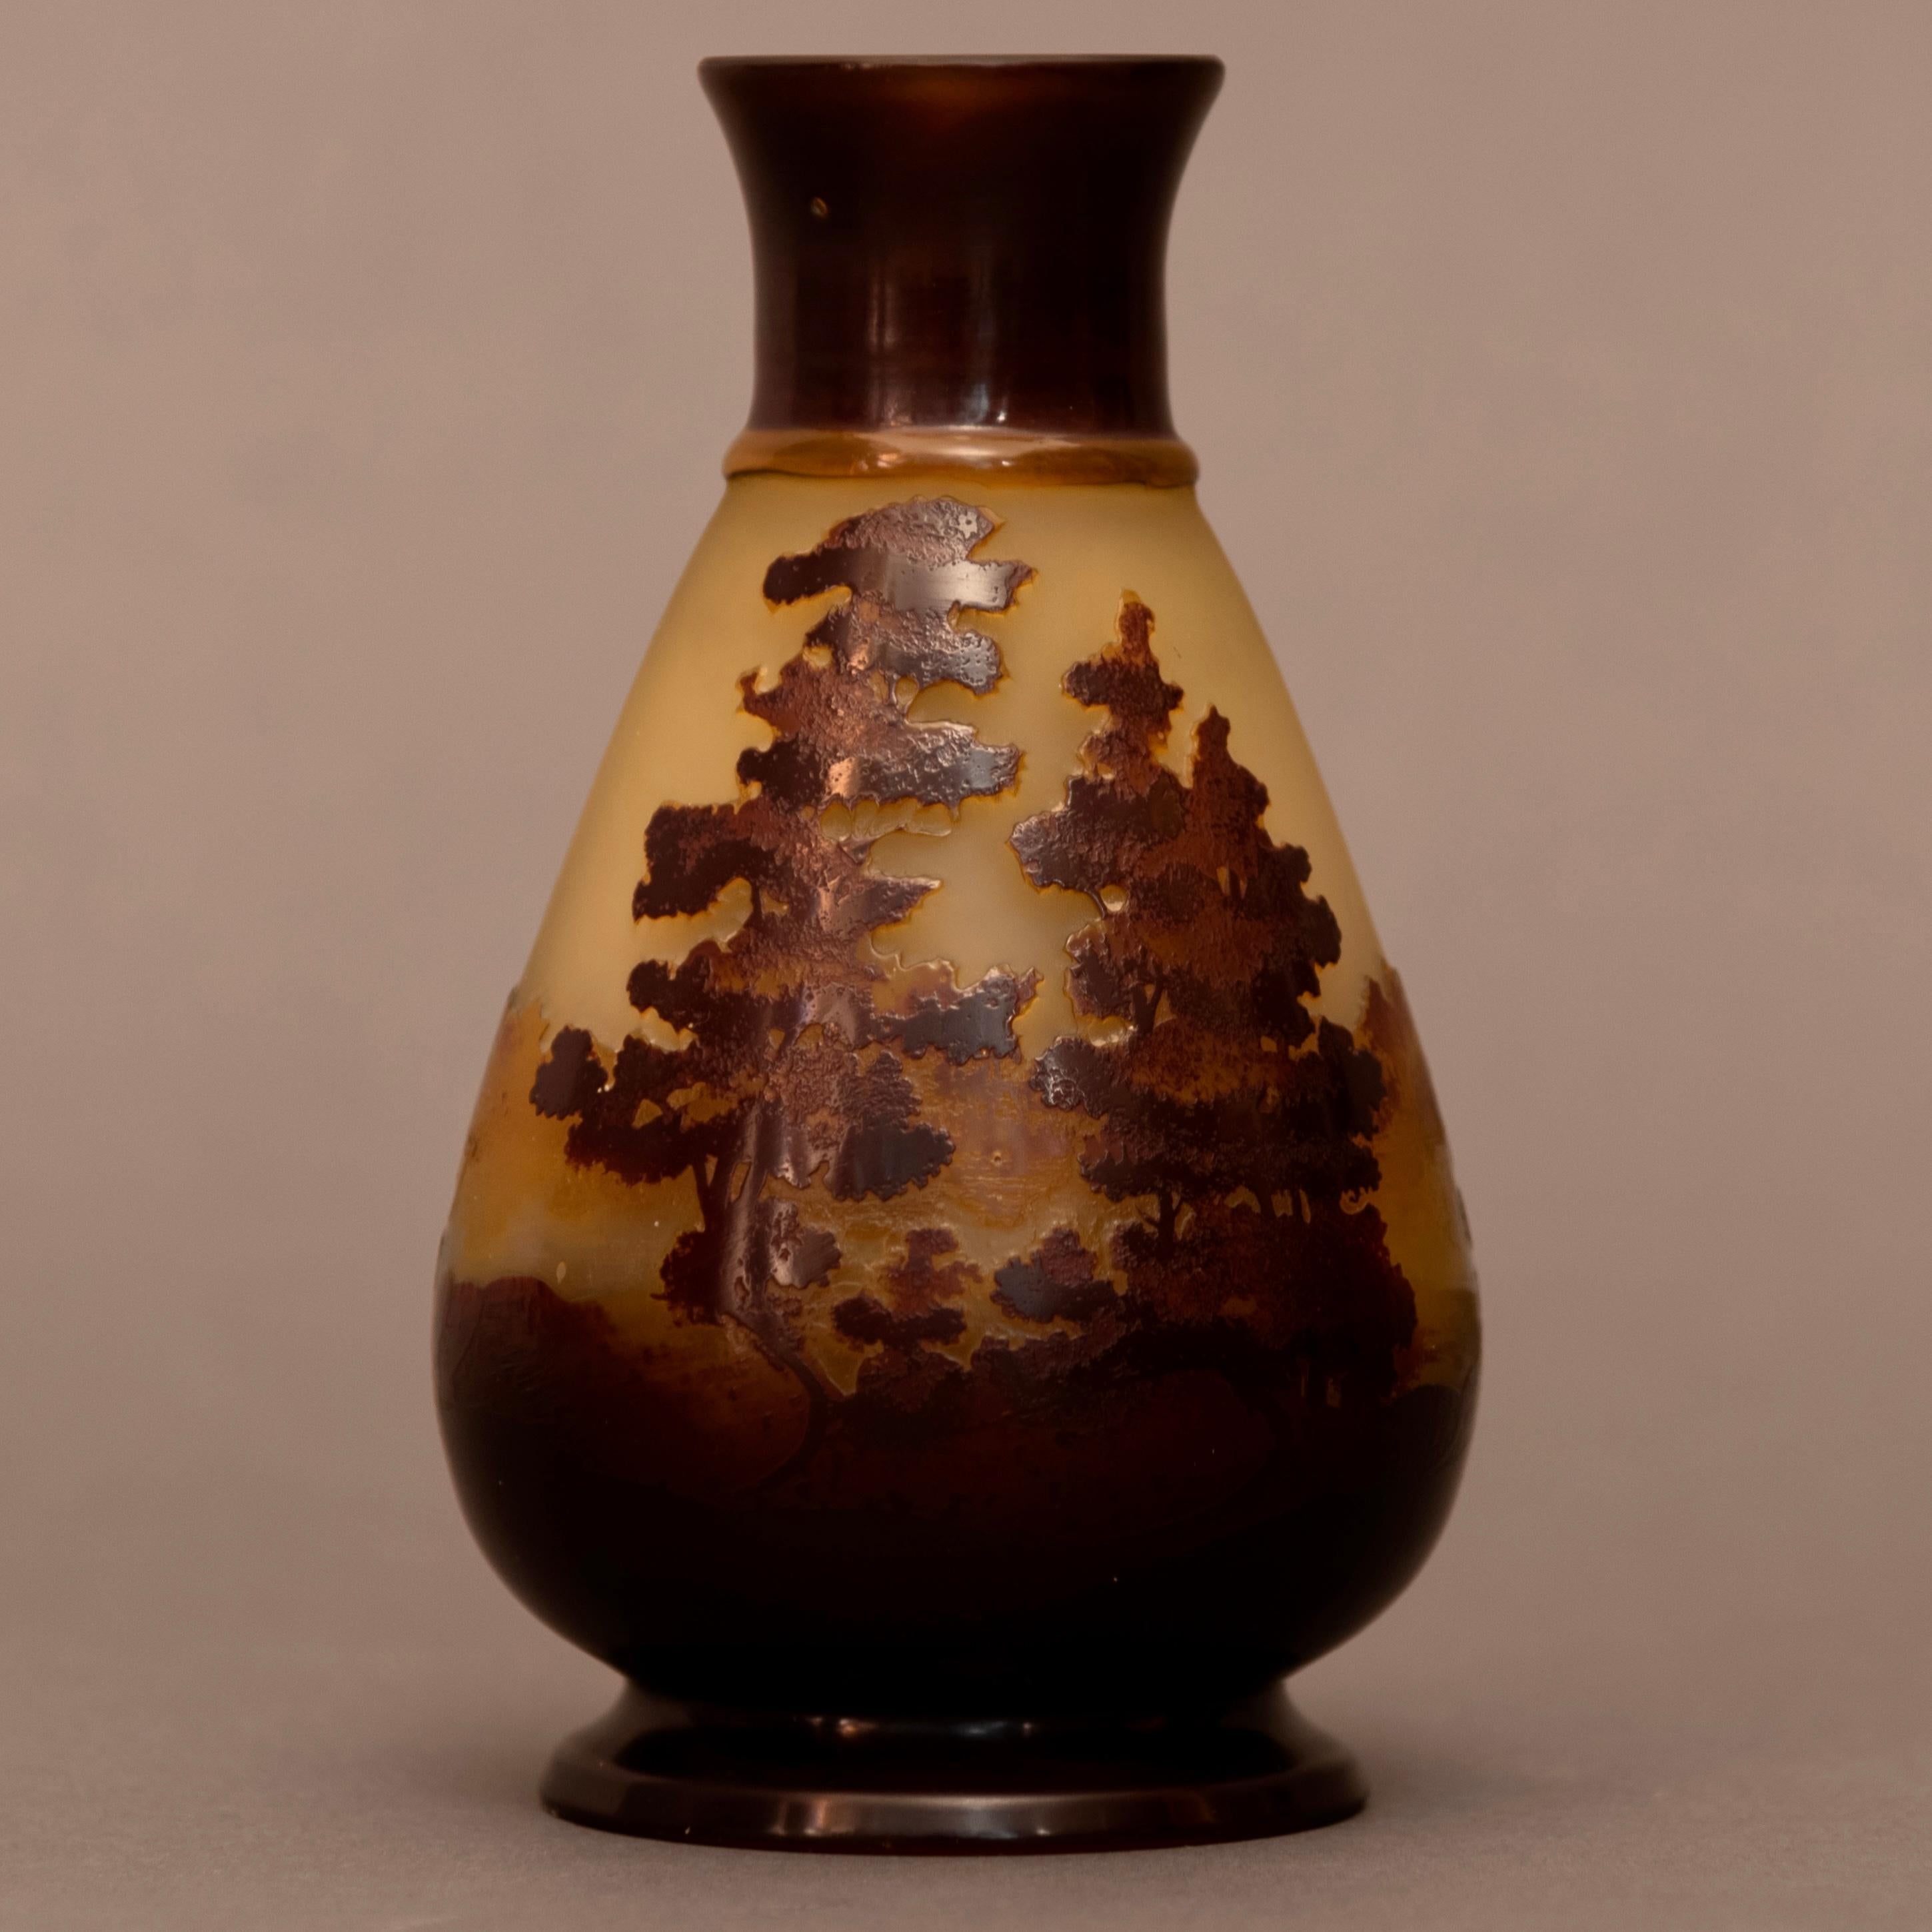 This vase shows a landscape of the Vosges region, a mountainous area in eastern France near Nancy. Known for the striking blue colour of the mountains at dawn. This was the homeland of Emile Gallé.